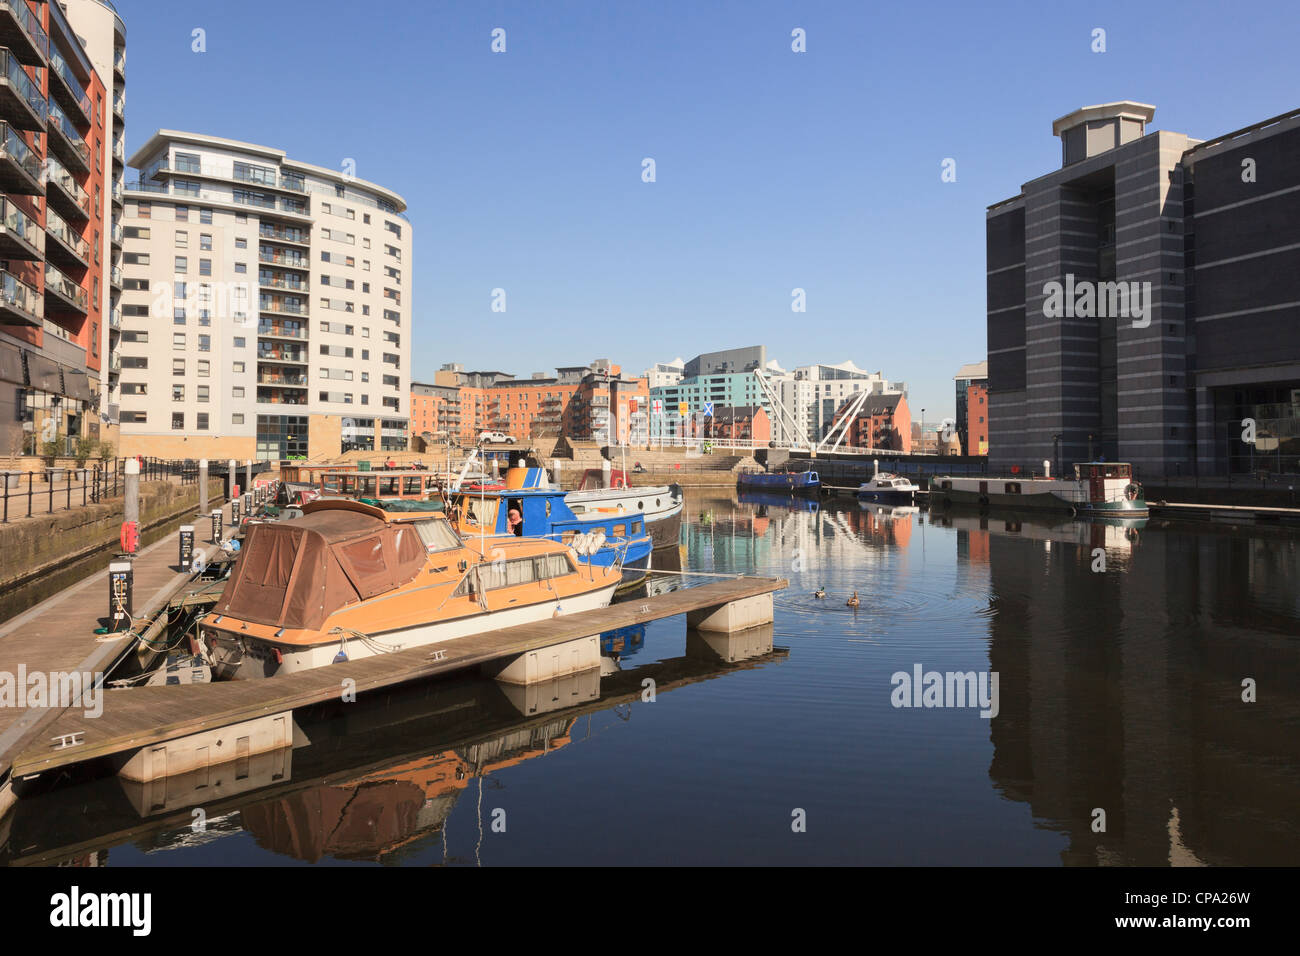 Clarence Dock, Leeds, West Yorkshire, Inghilterra, Regno Unito. Barche ormeggiate dal pontile con il Royal Armouries Museum di fronte Foto Stock